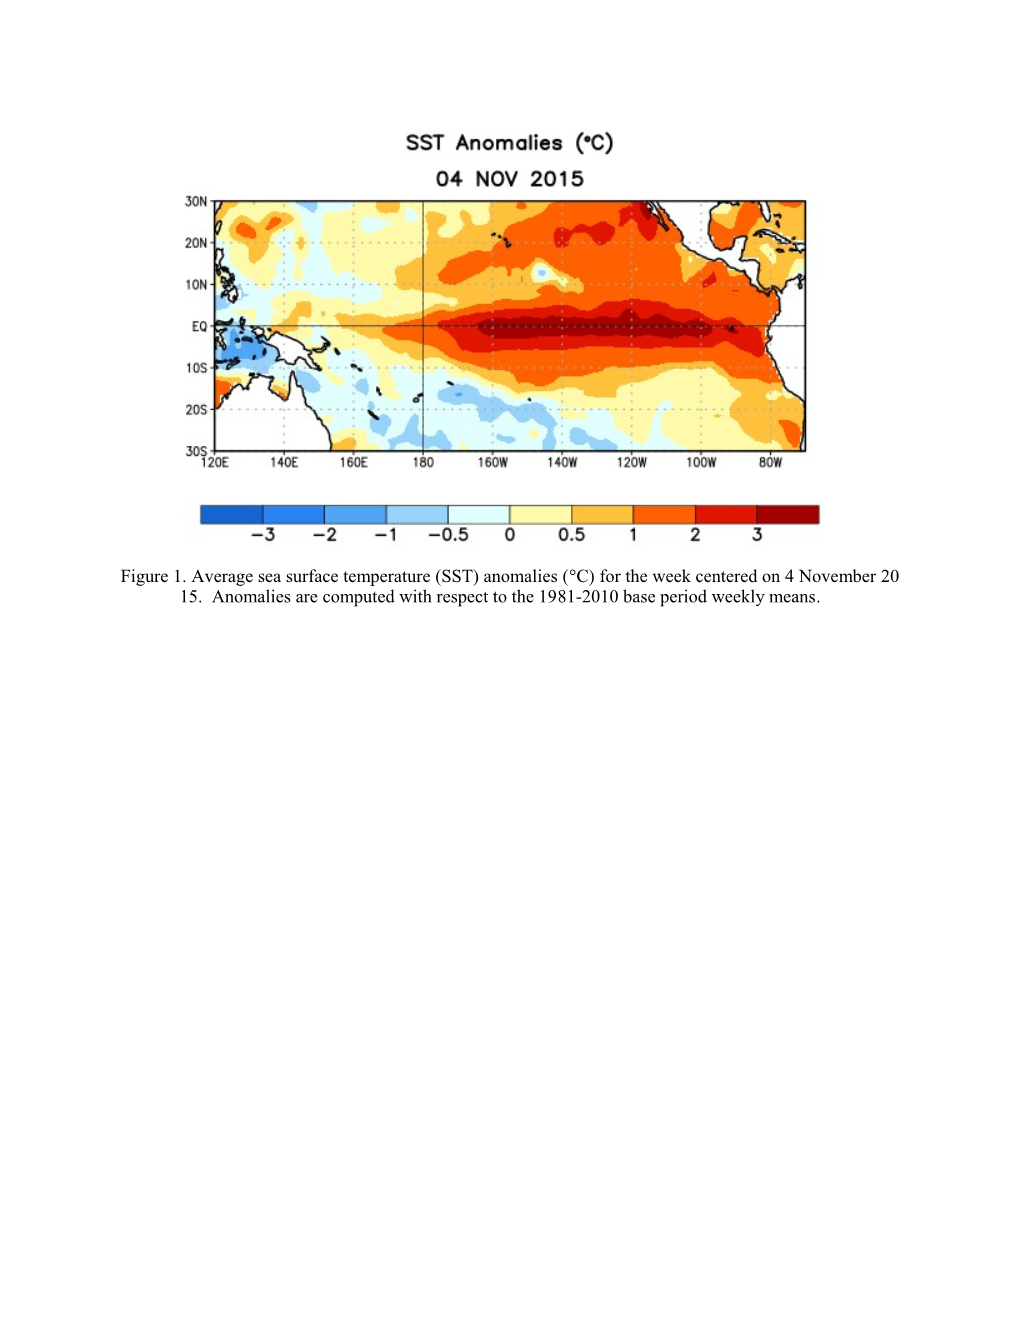 Synopsis: ENSO-Neutral Conditions May Transition to La Niña Co s5